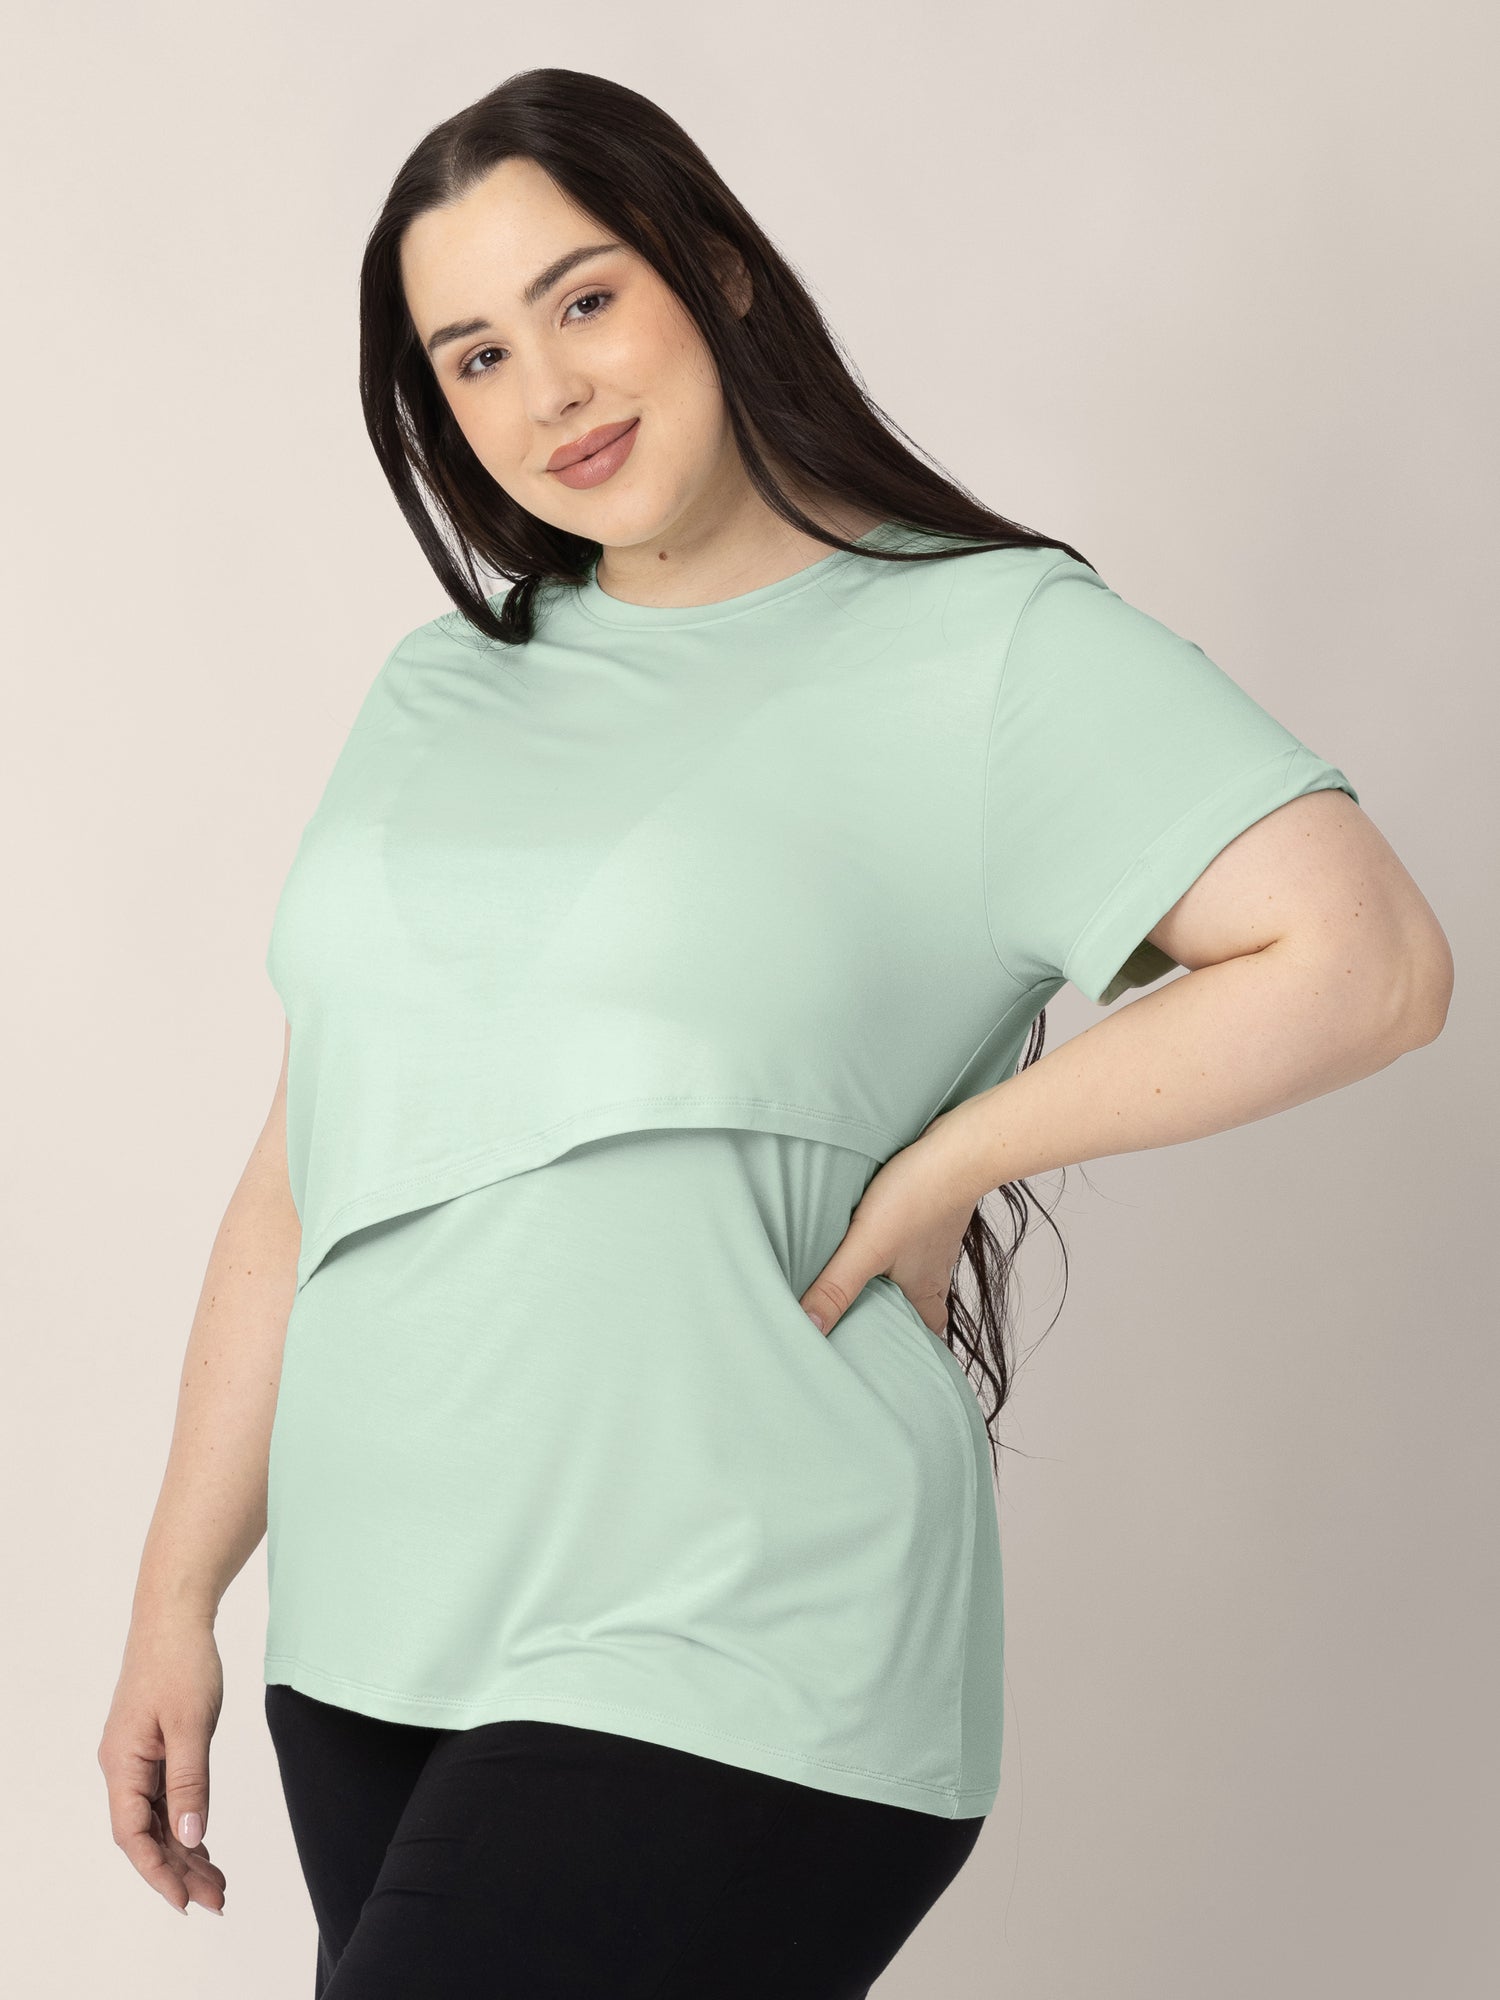 Three-quarters view of a model wearing the Everyday Asymmetrical Nursing T-shirt in Soft Mint.